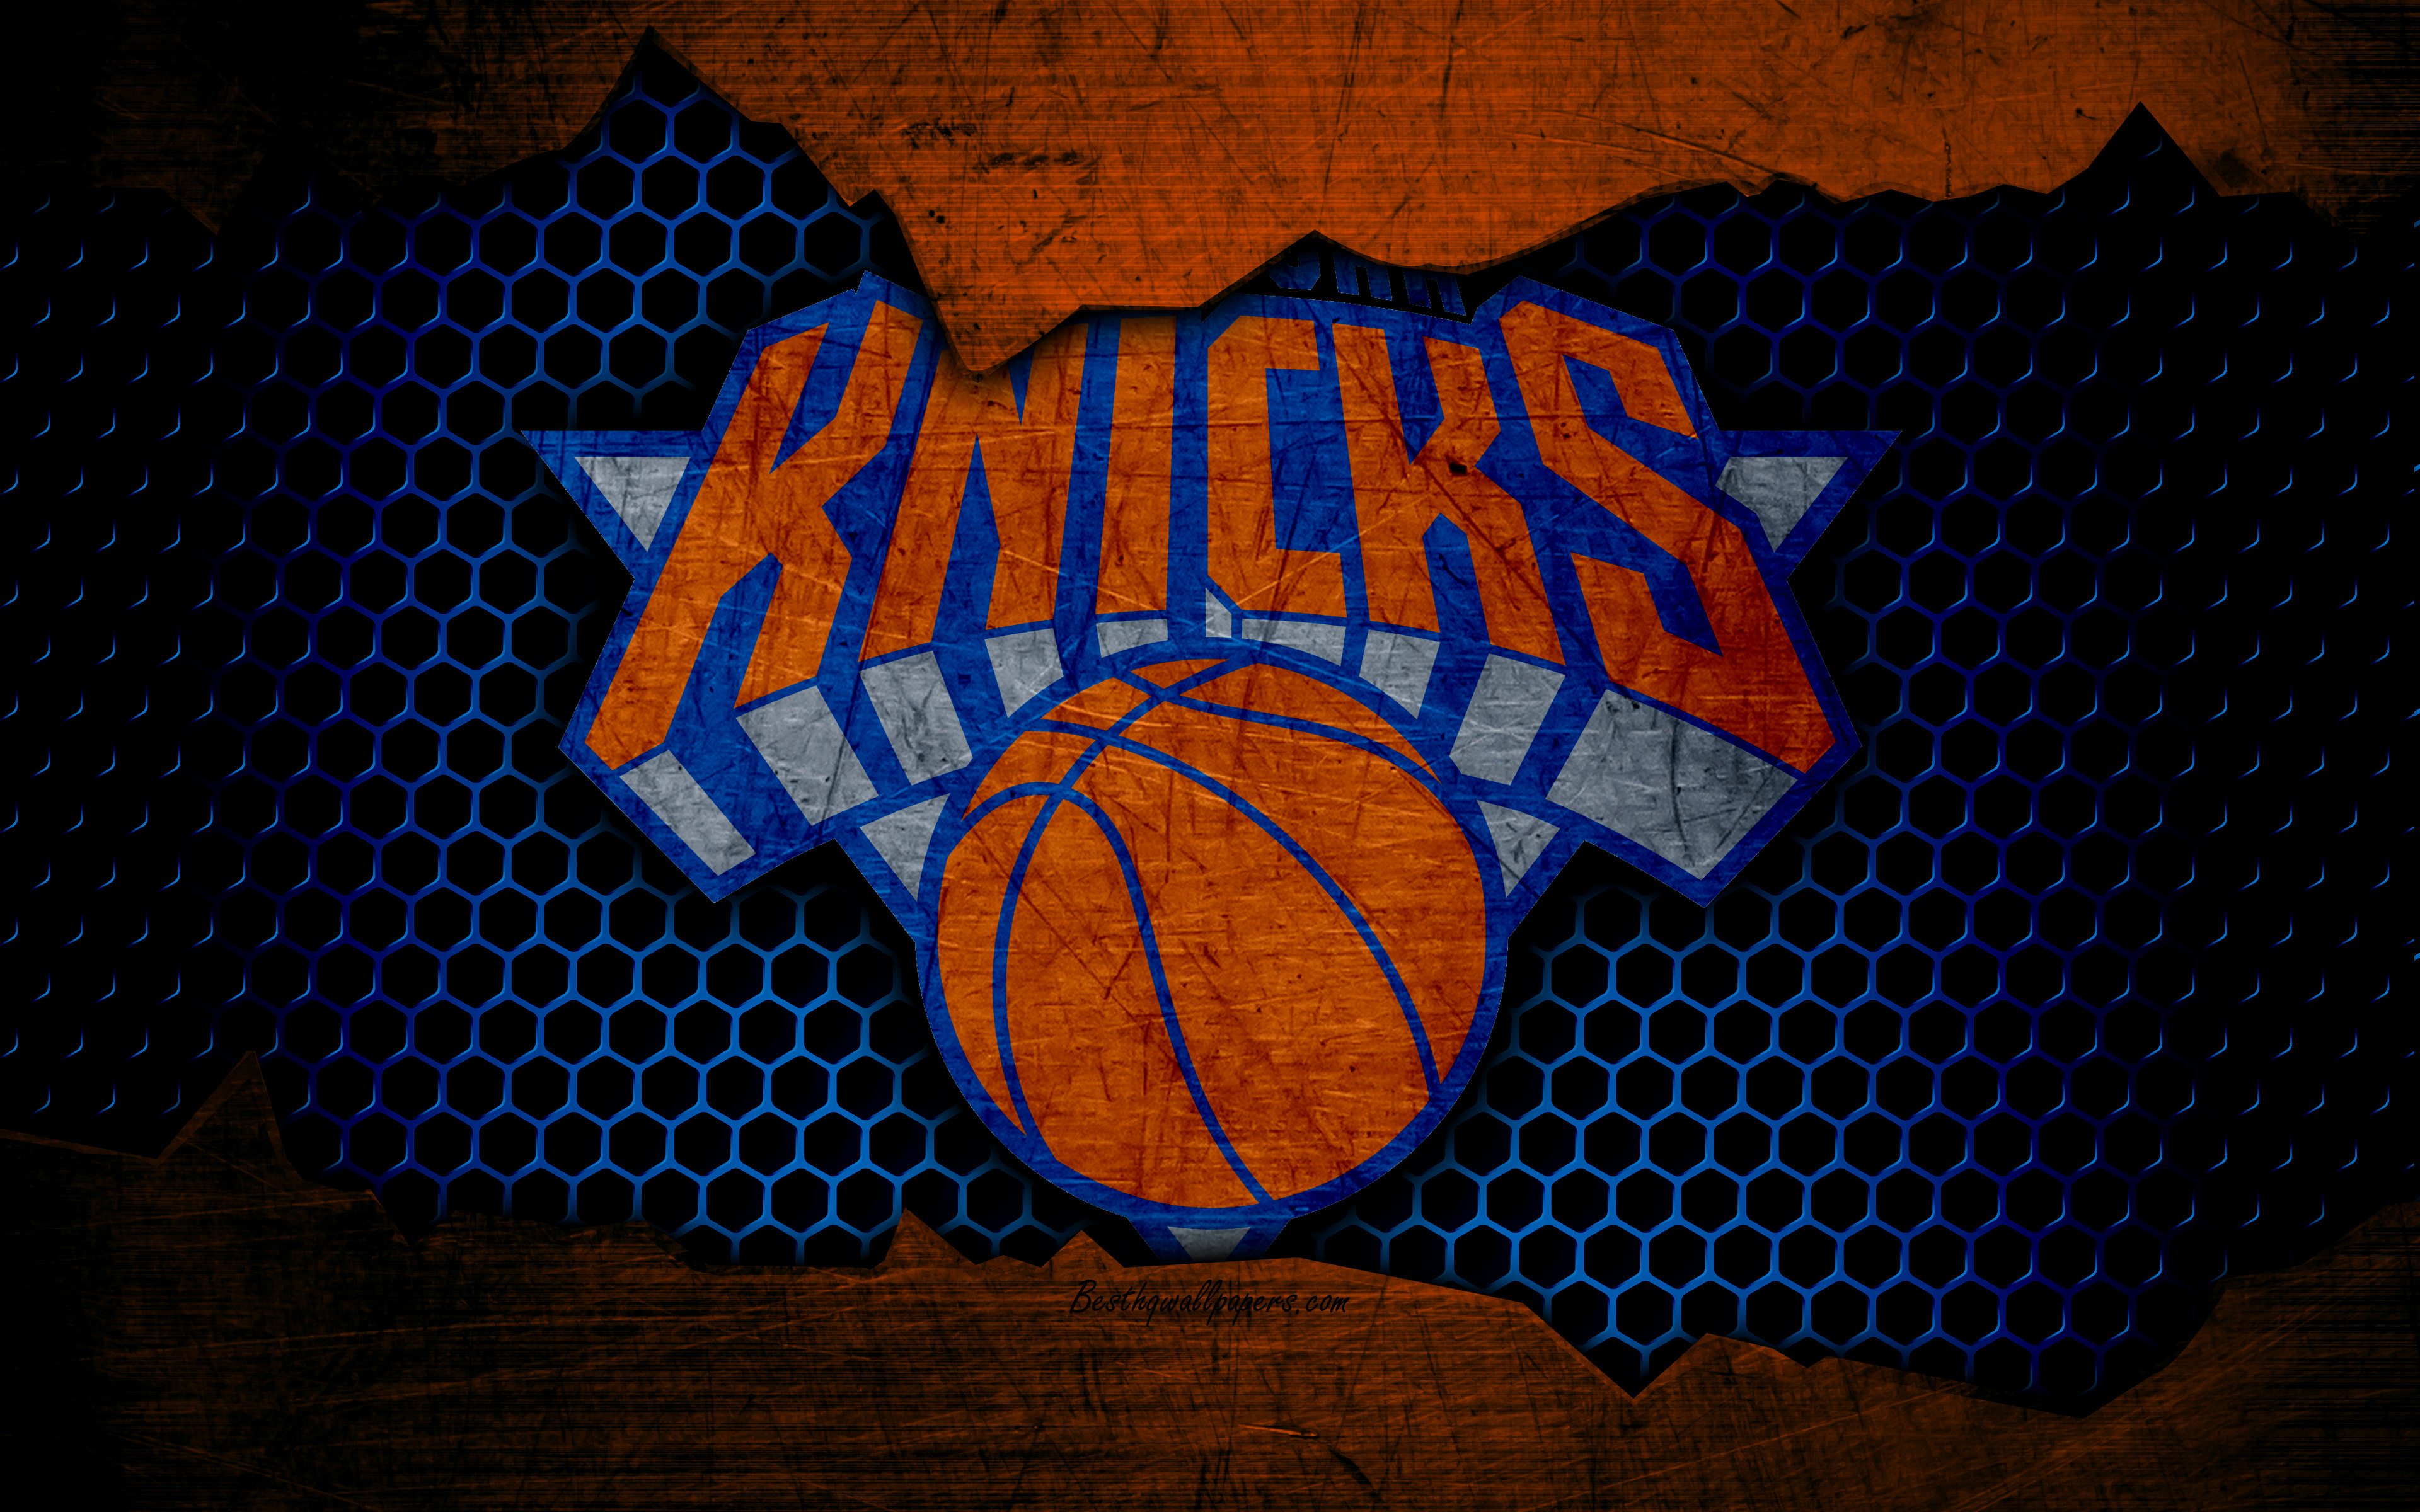 Download wallpaper New York Knicks, 4k, logo, NBA, basketball, NY Knicks, Eastern Conference, USA, grunge, metal texture, Atlantic Division for desktop with resolution 3840x2400. High Quality HD picture wallpaper